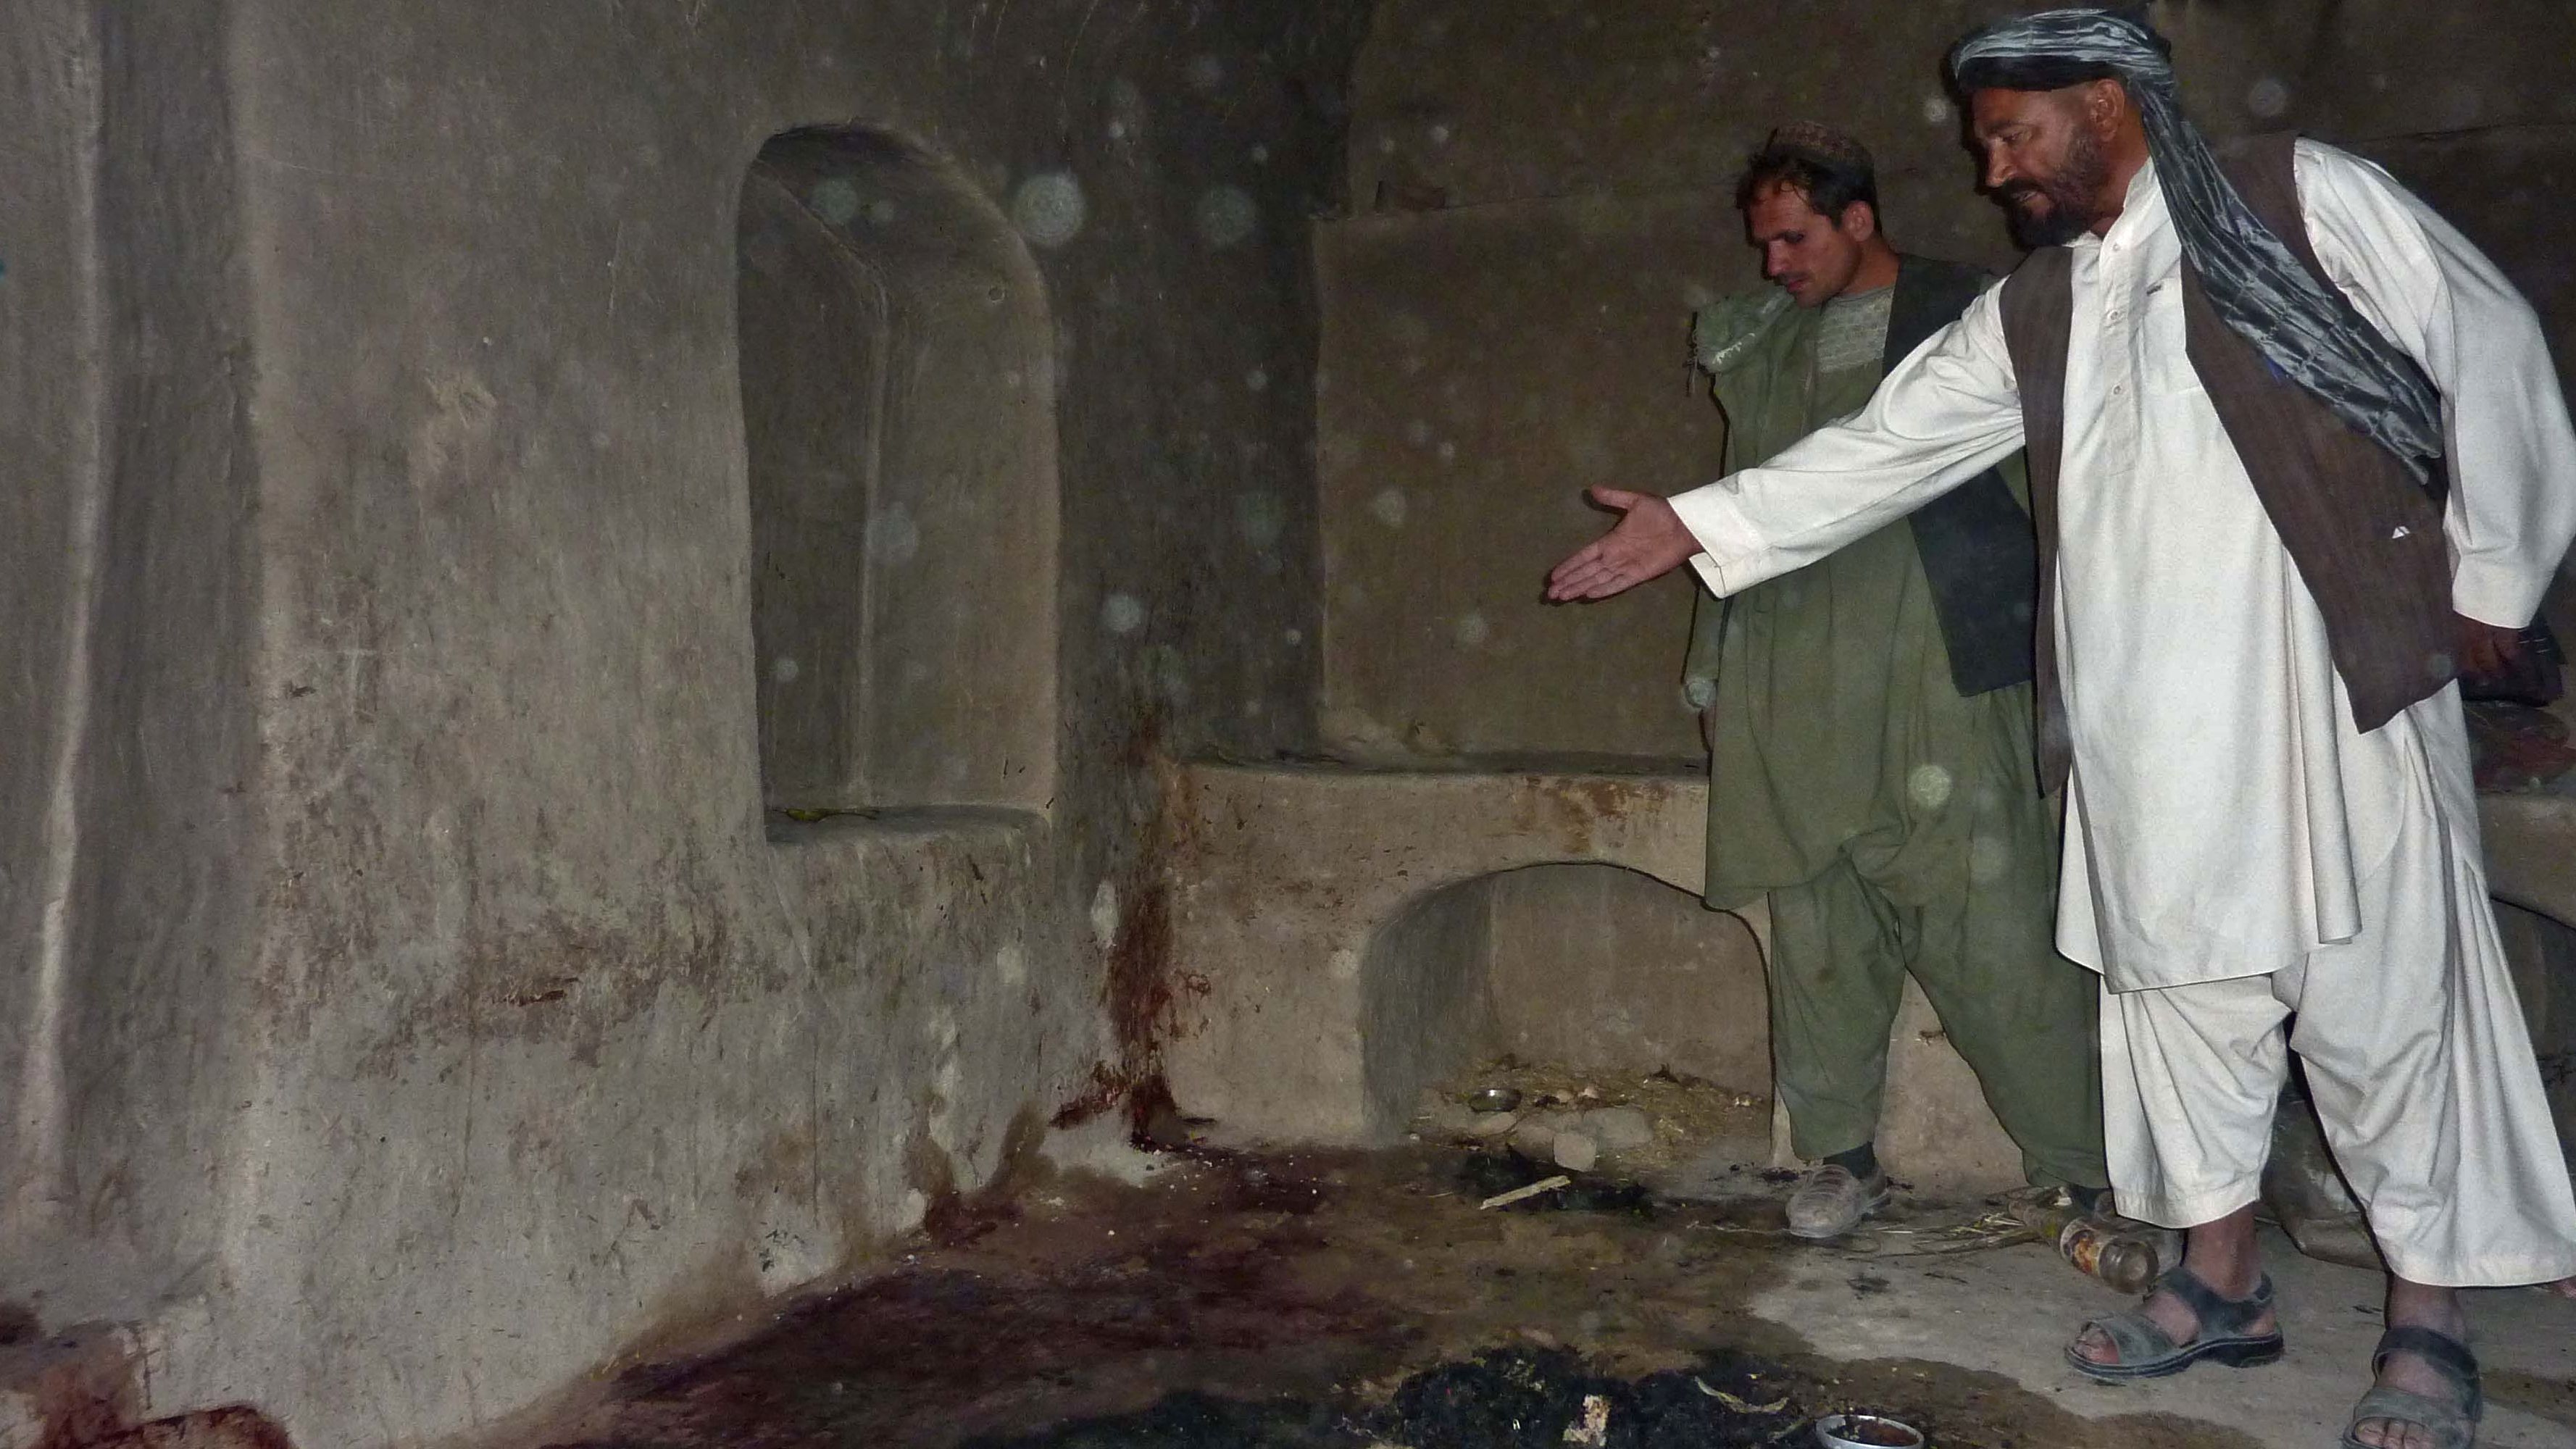 A villager points to a spot where a family was allegedly shot by a rogue U.S. soldier in Alkozai, Afghanistan.